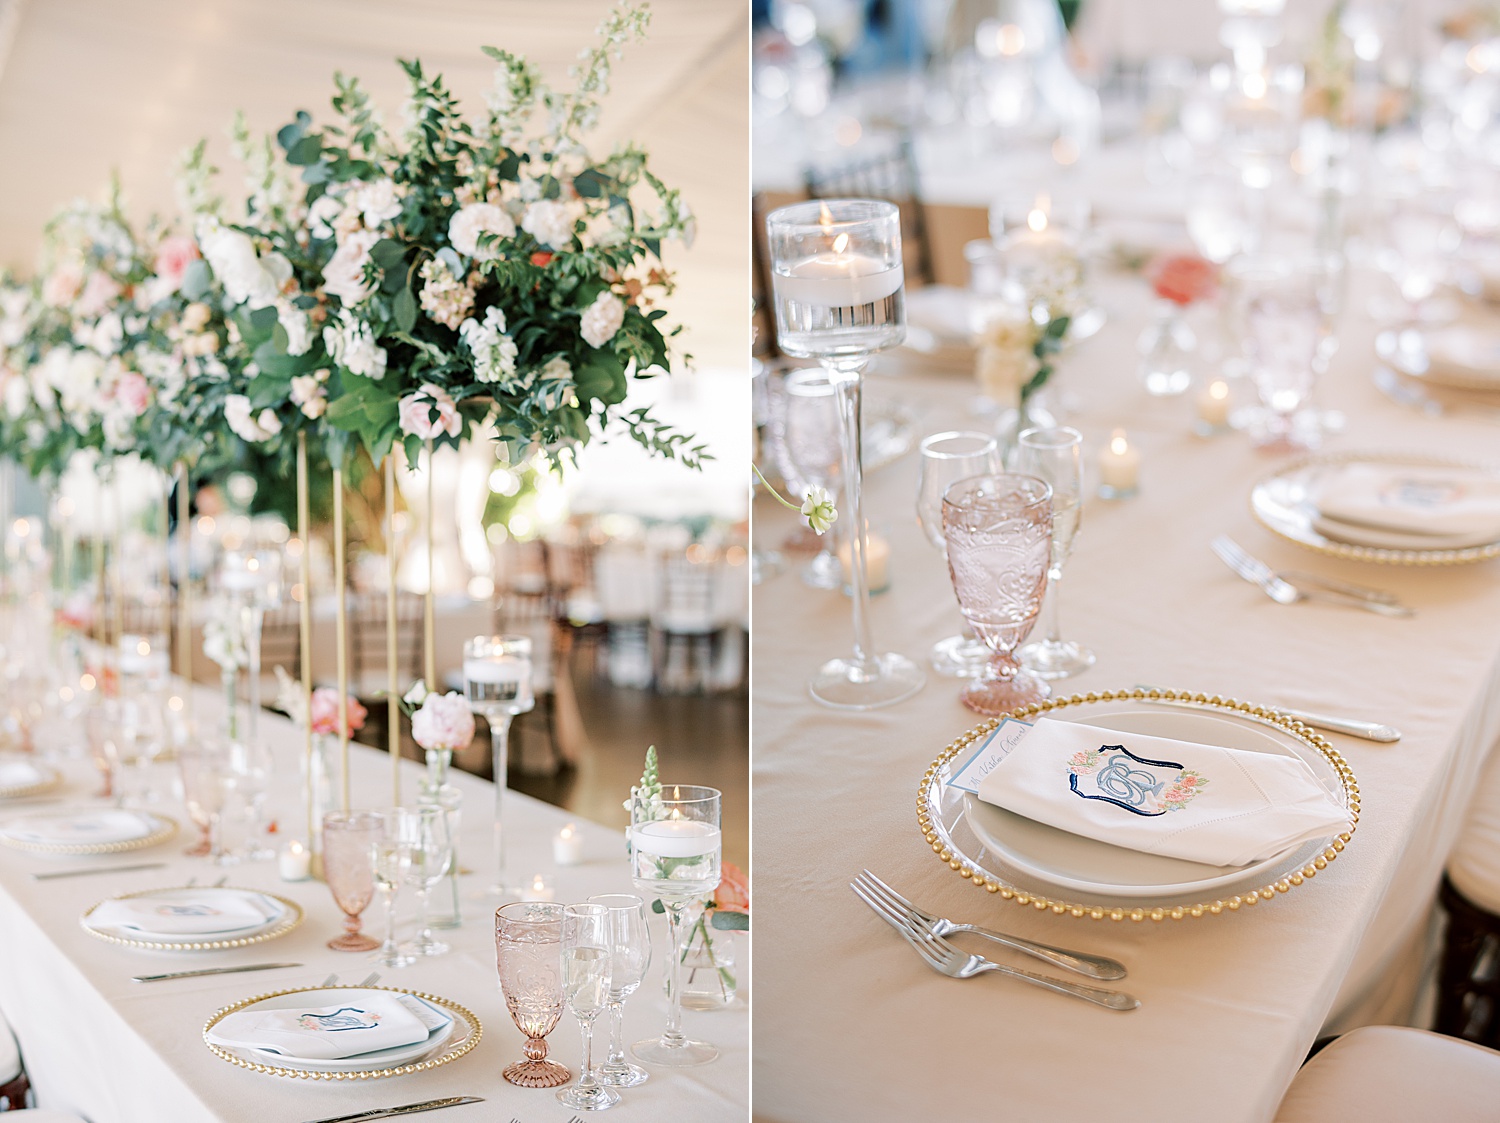 place settings with gold-rimmed plates and custom crest napkins 